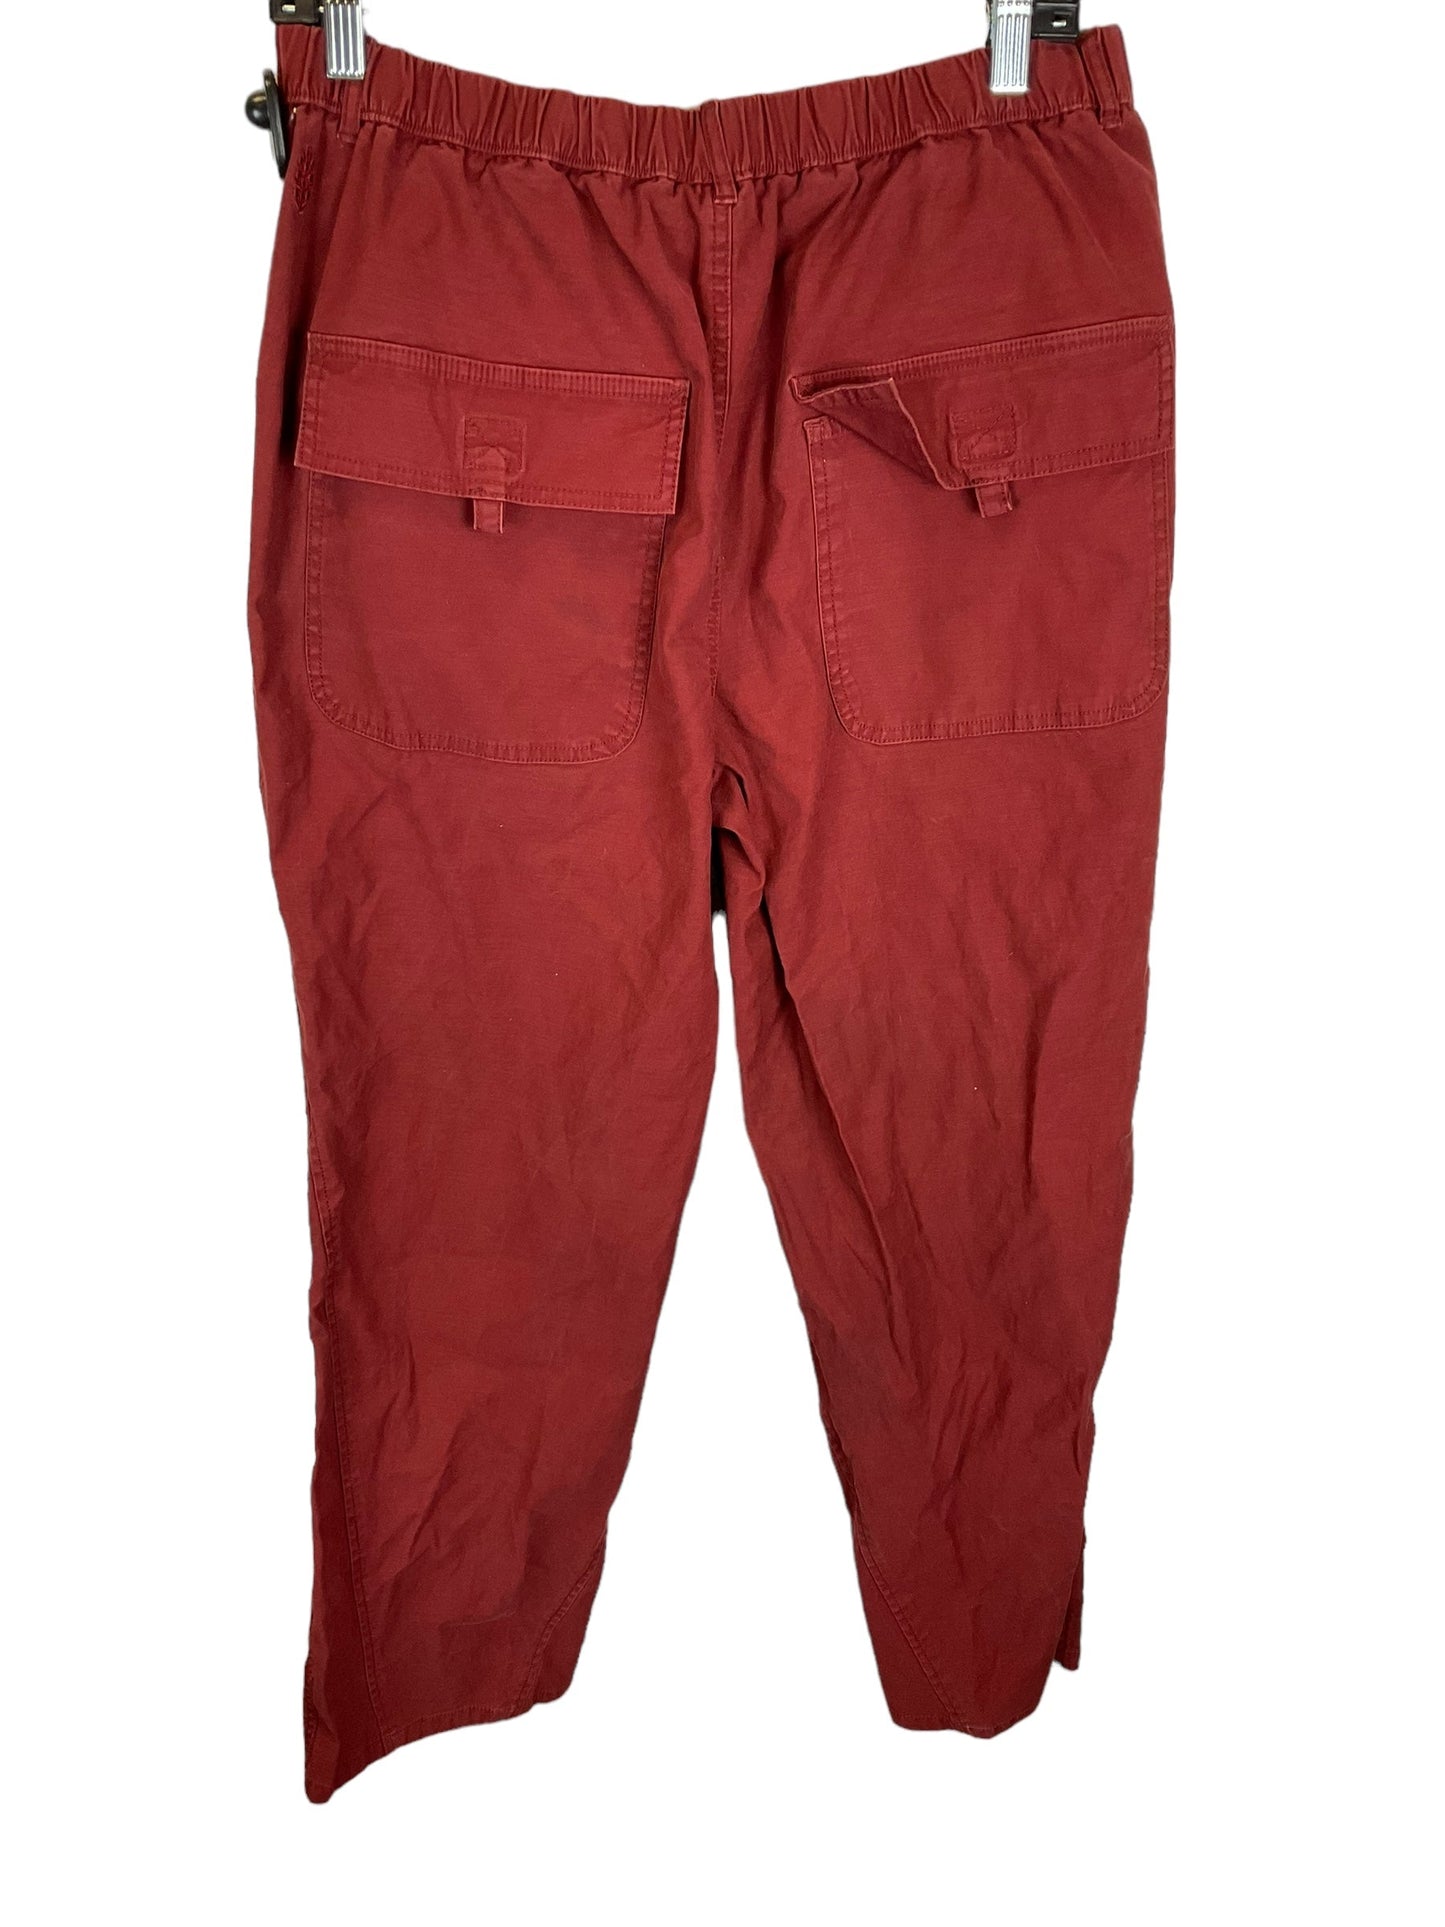 Red Pants Cargo & Utility Free People, Size L